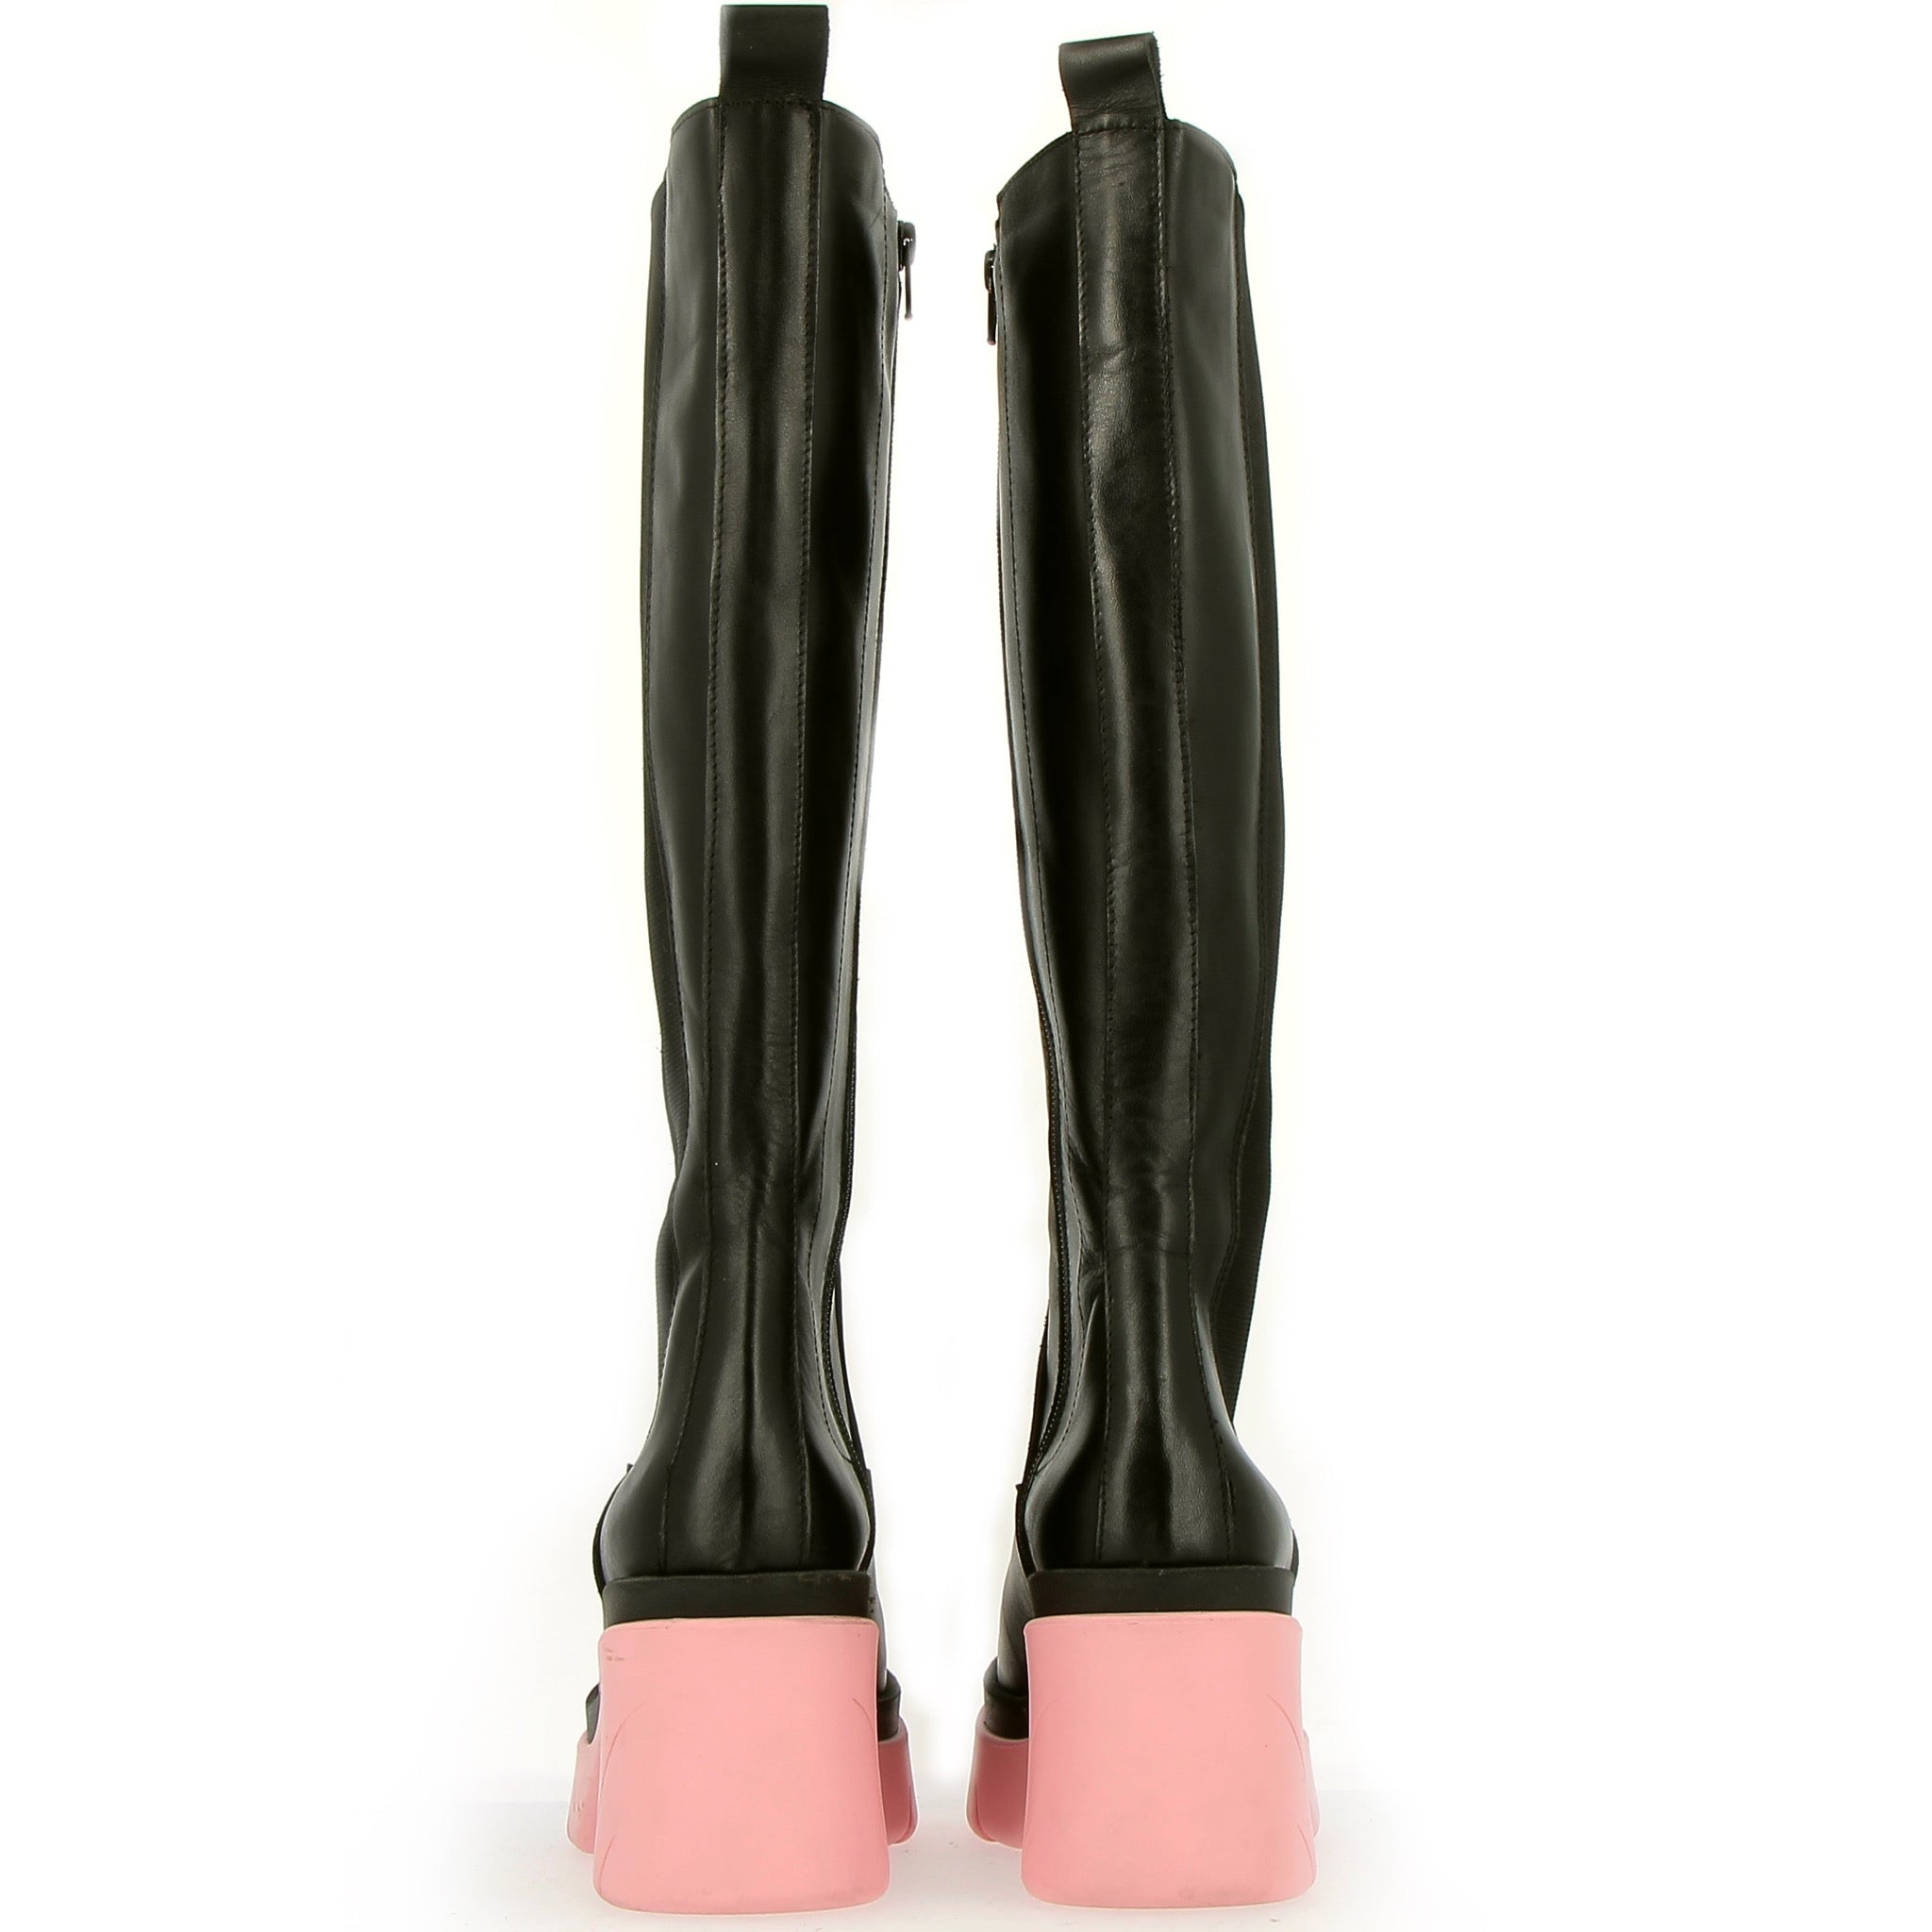 Boot with elastic and internal zip pink sole